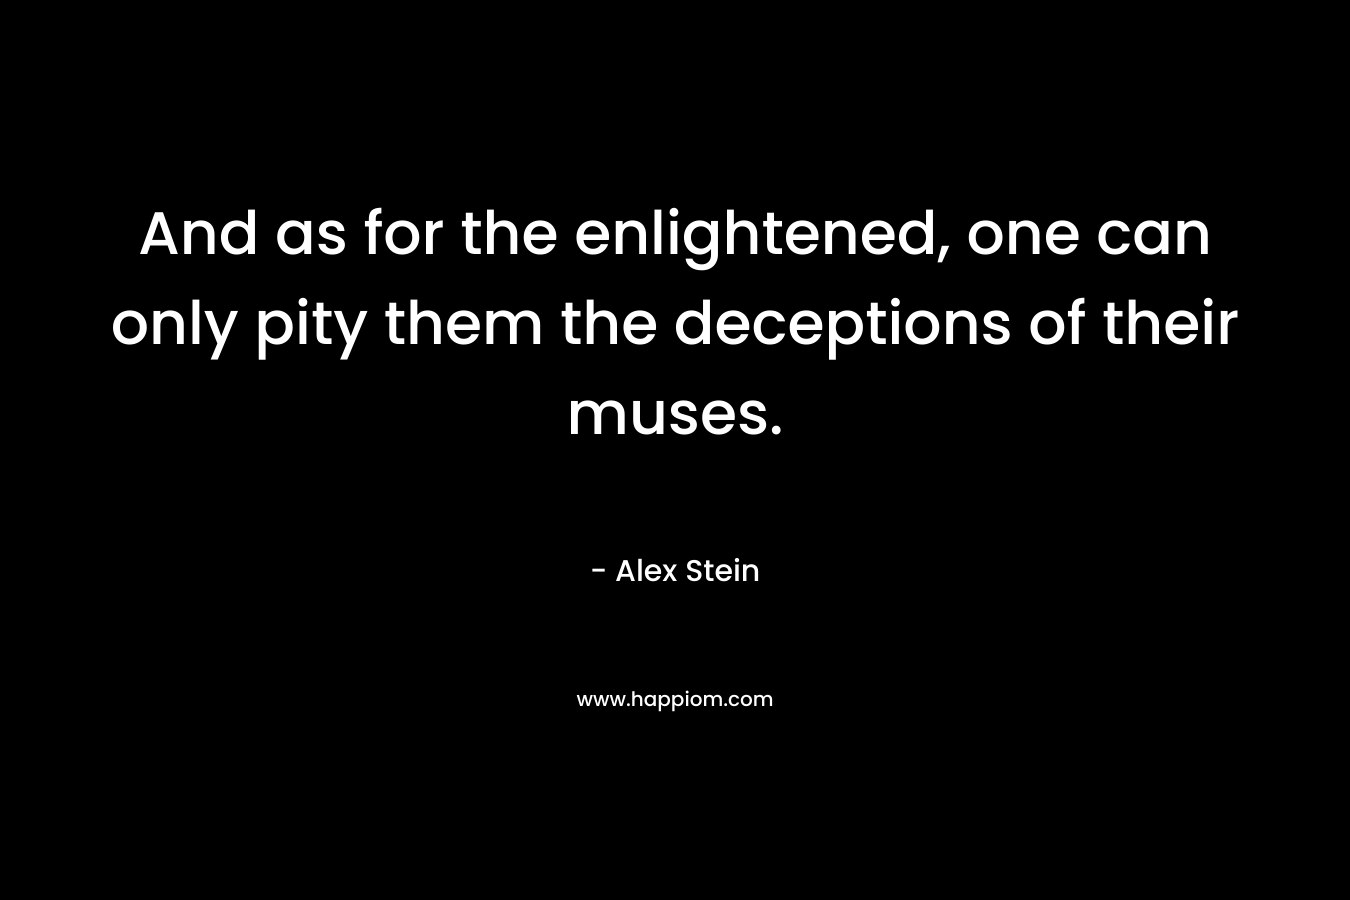 And as for the enlightened, one can only pity them the deceptions of their muses. – Alex Stein